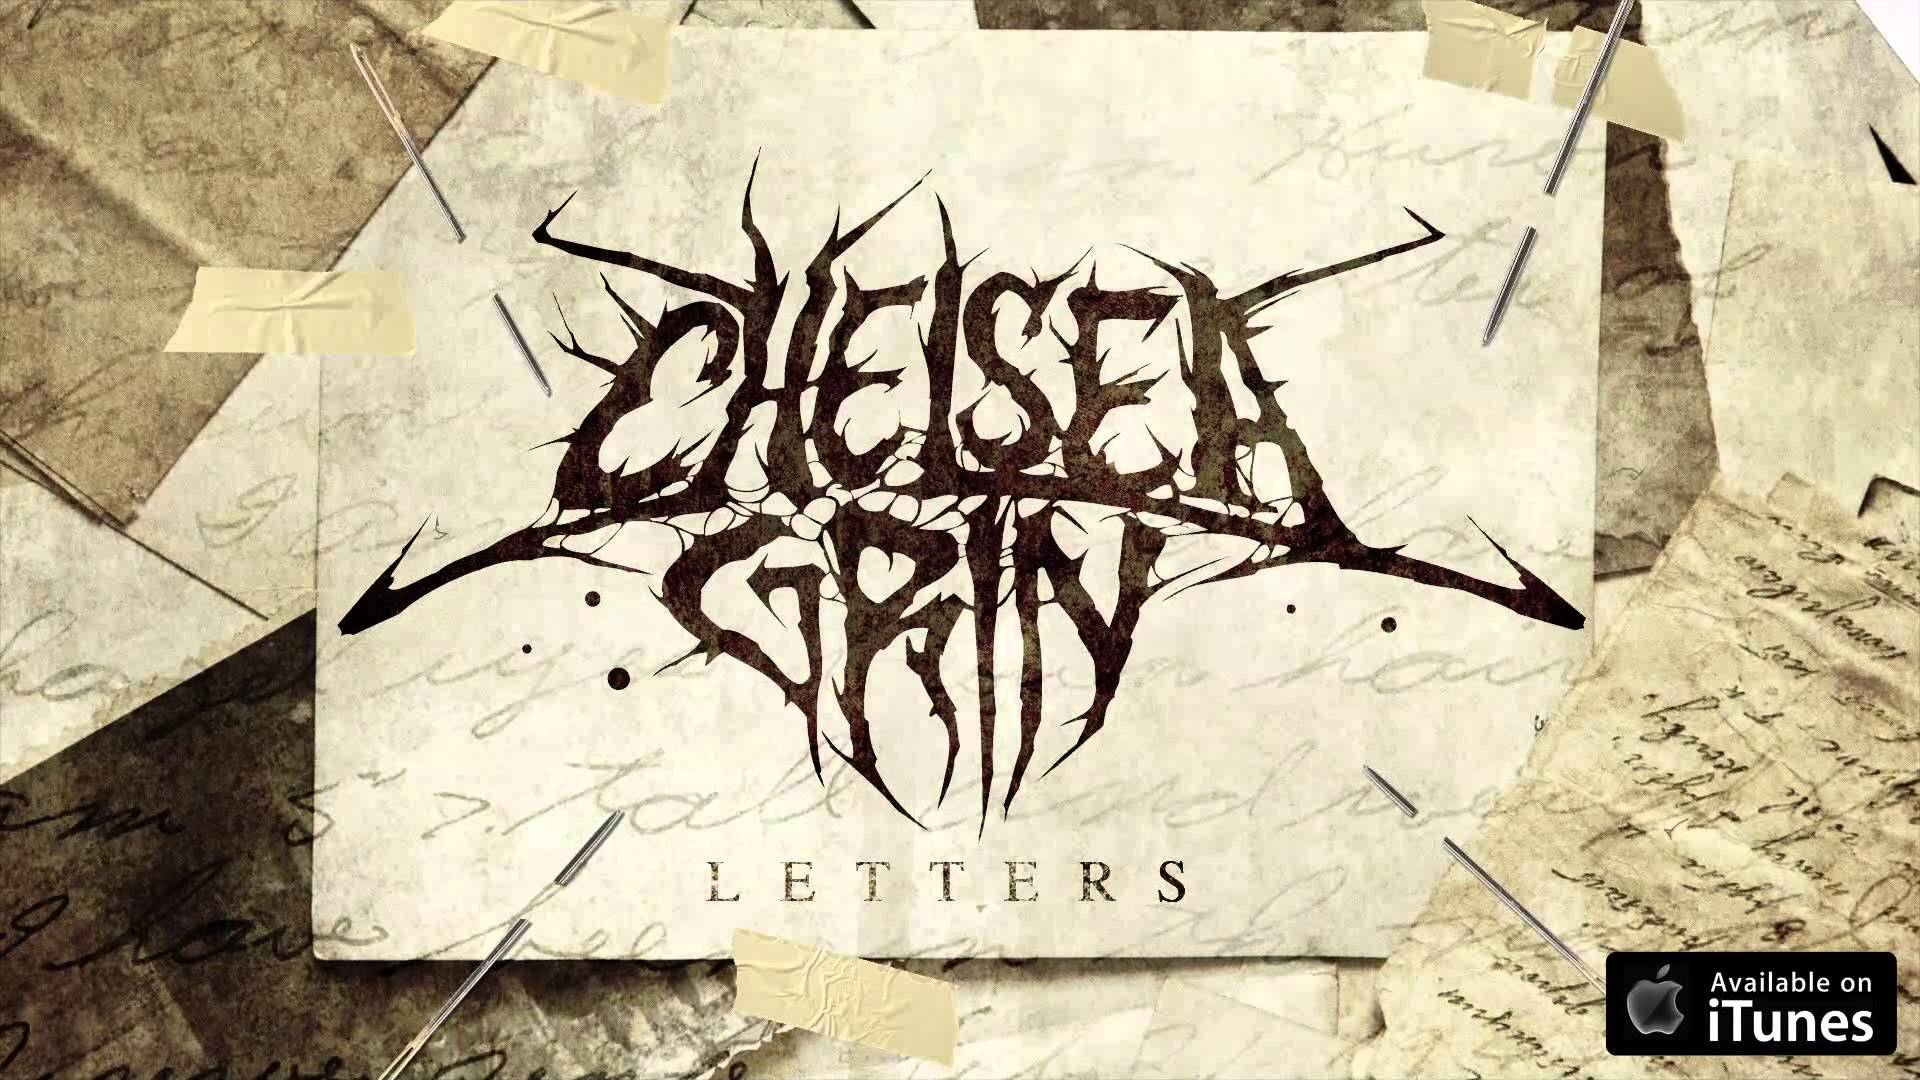 Best image about Chelsea Grin. Album covers